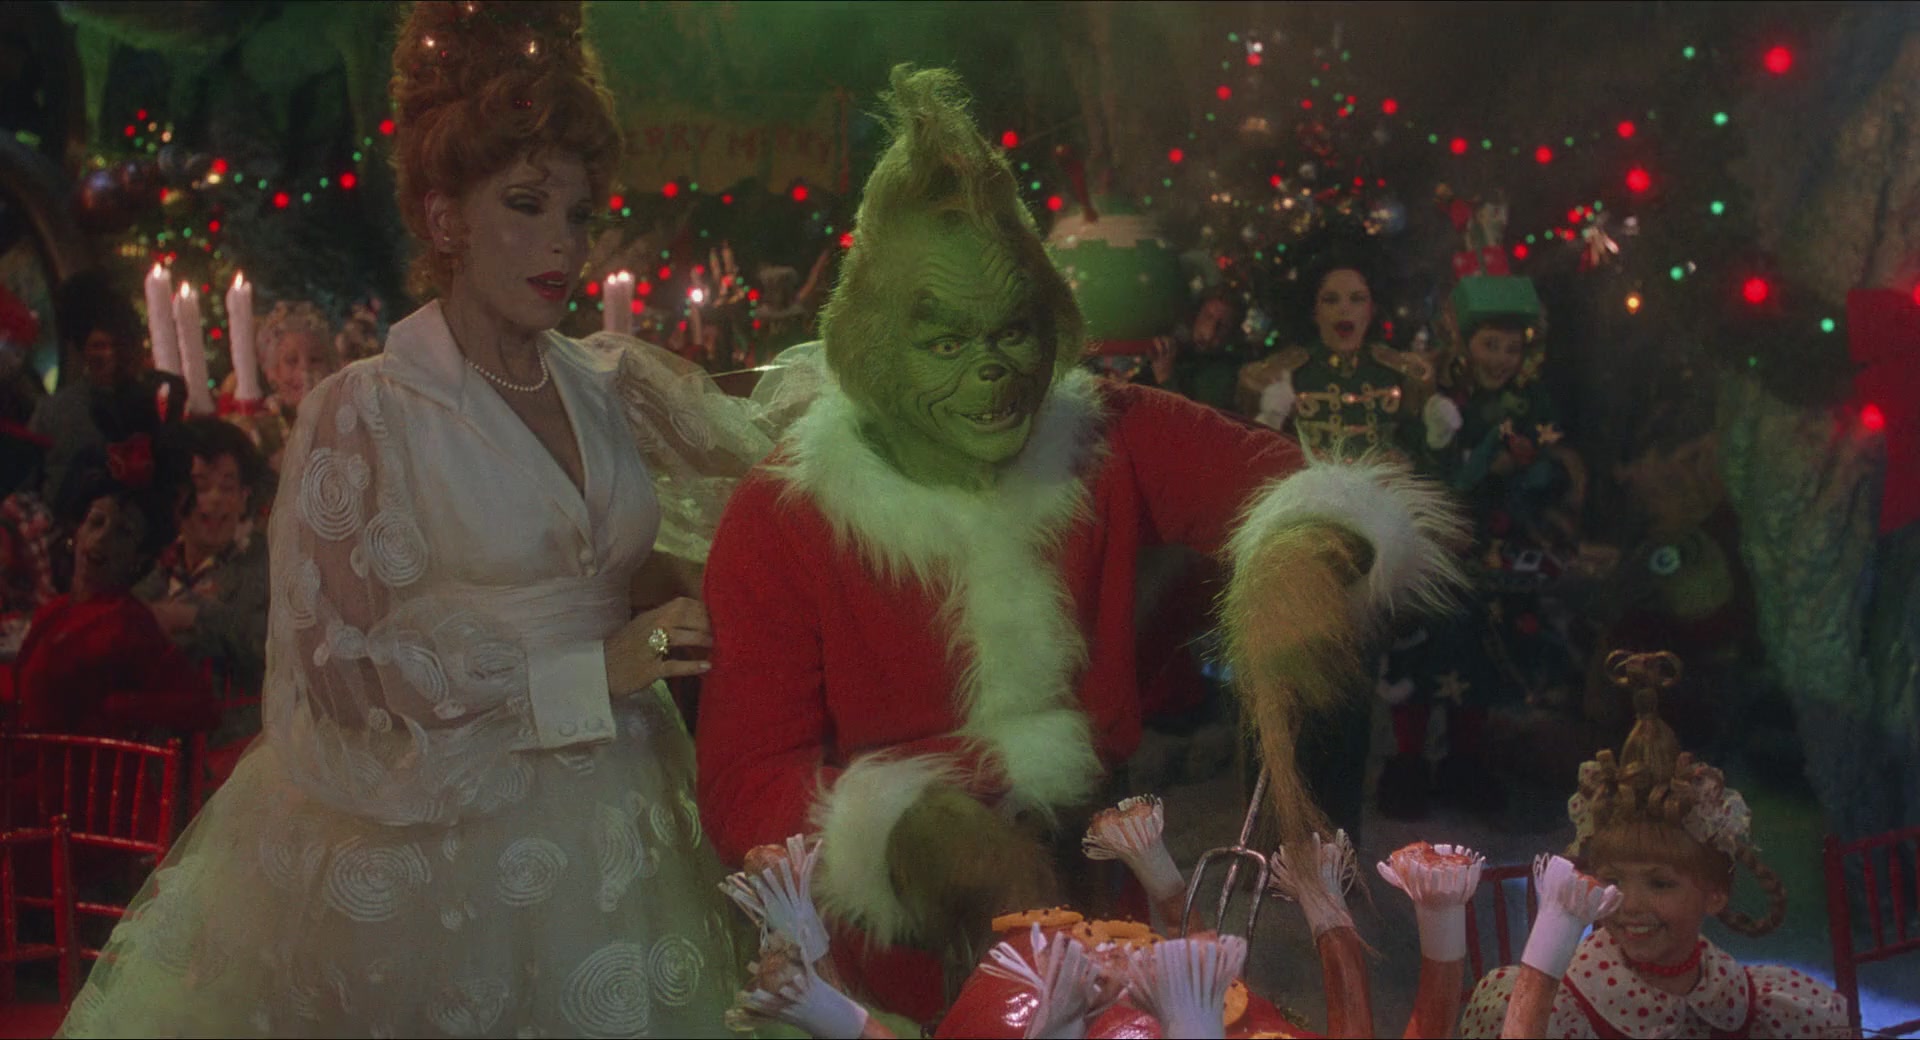 How The Grinch Stole Christmas 2000 Full Movie Online In Hd Quality